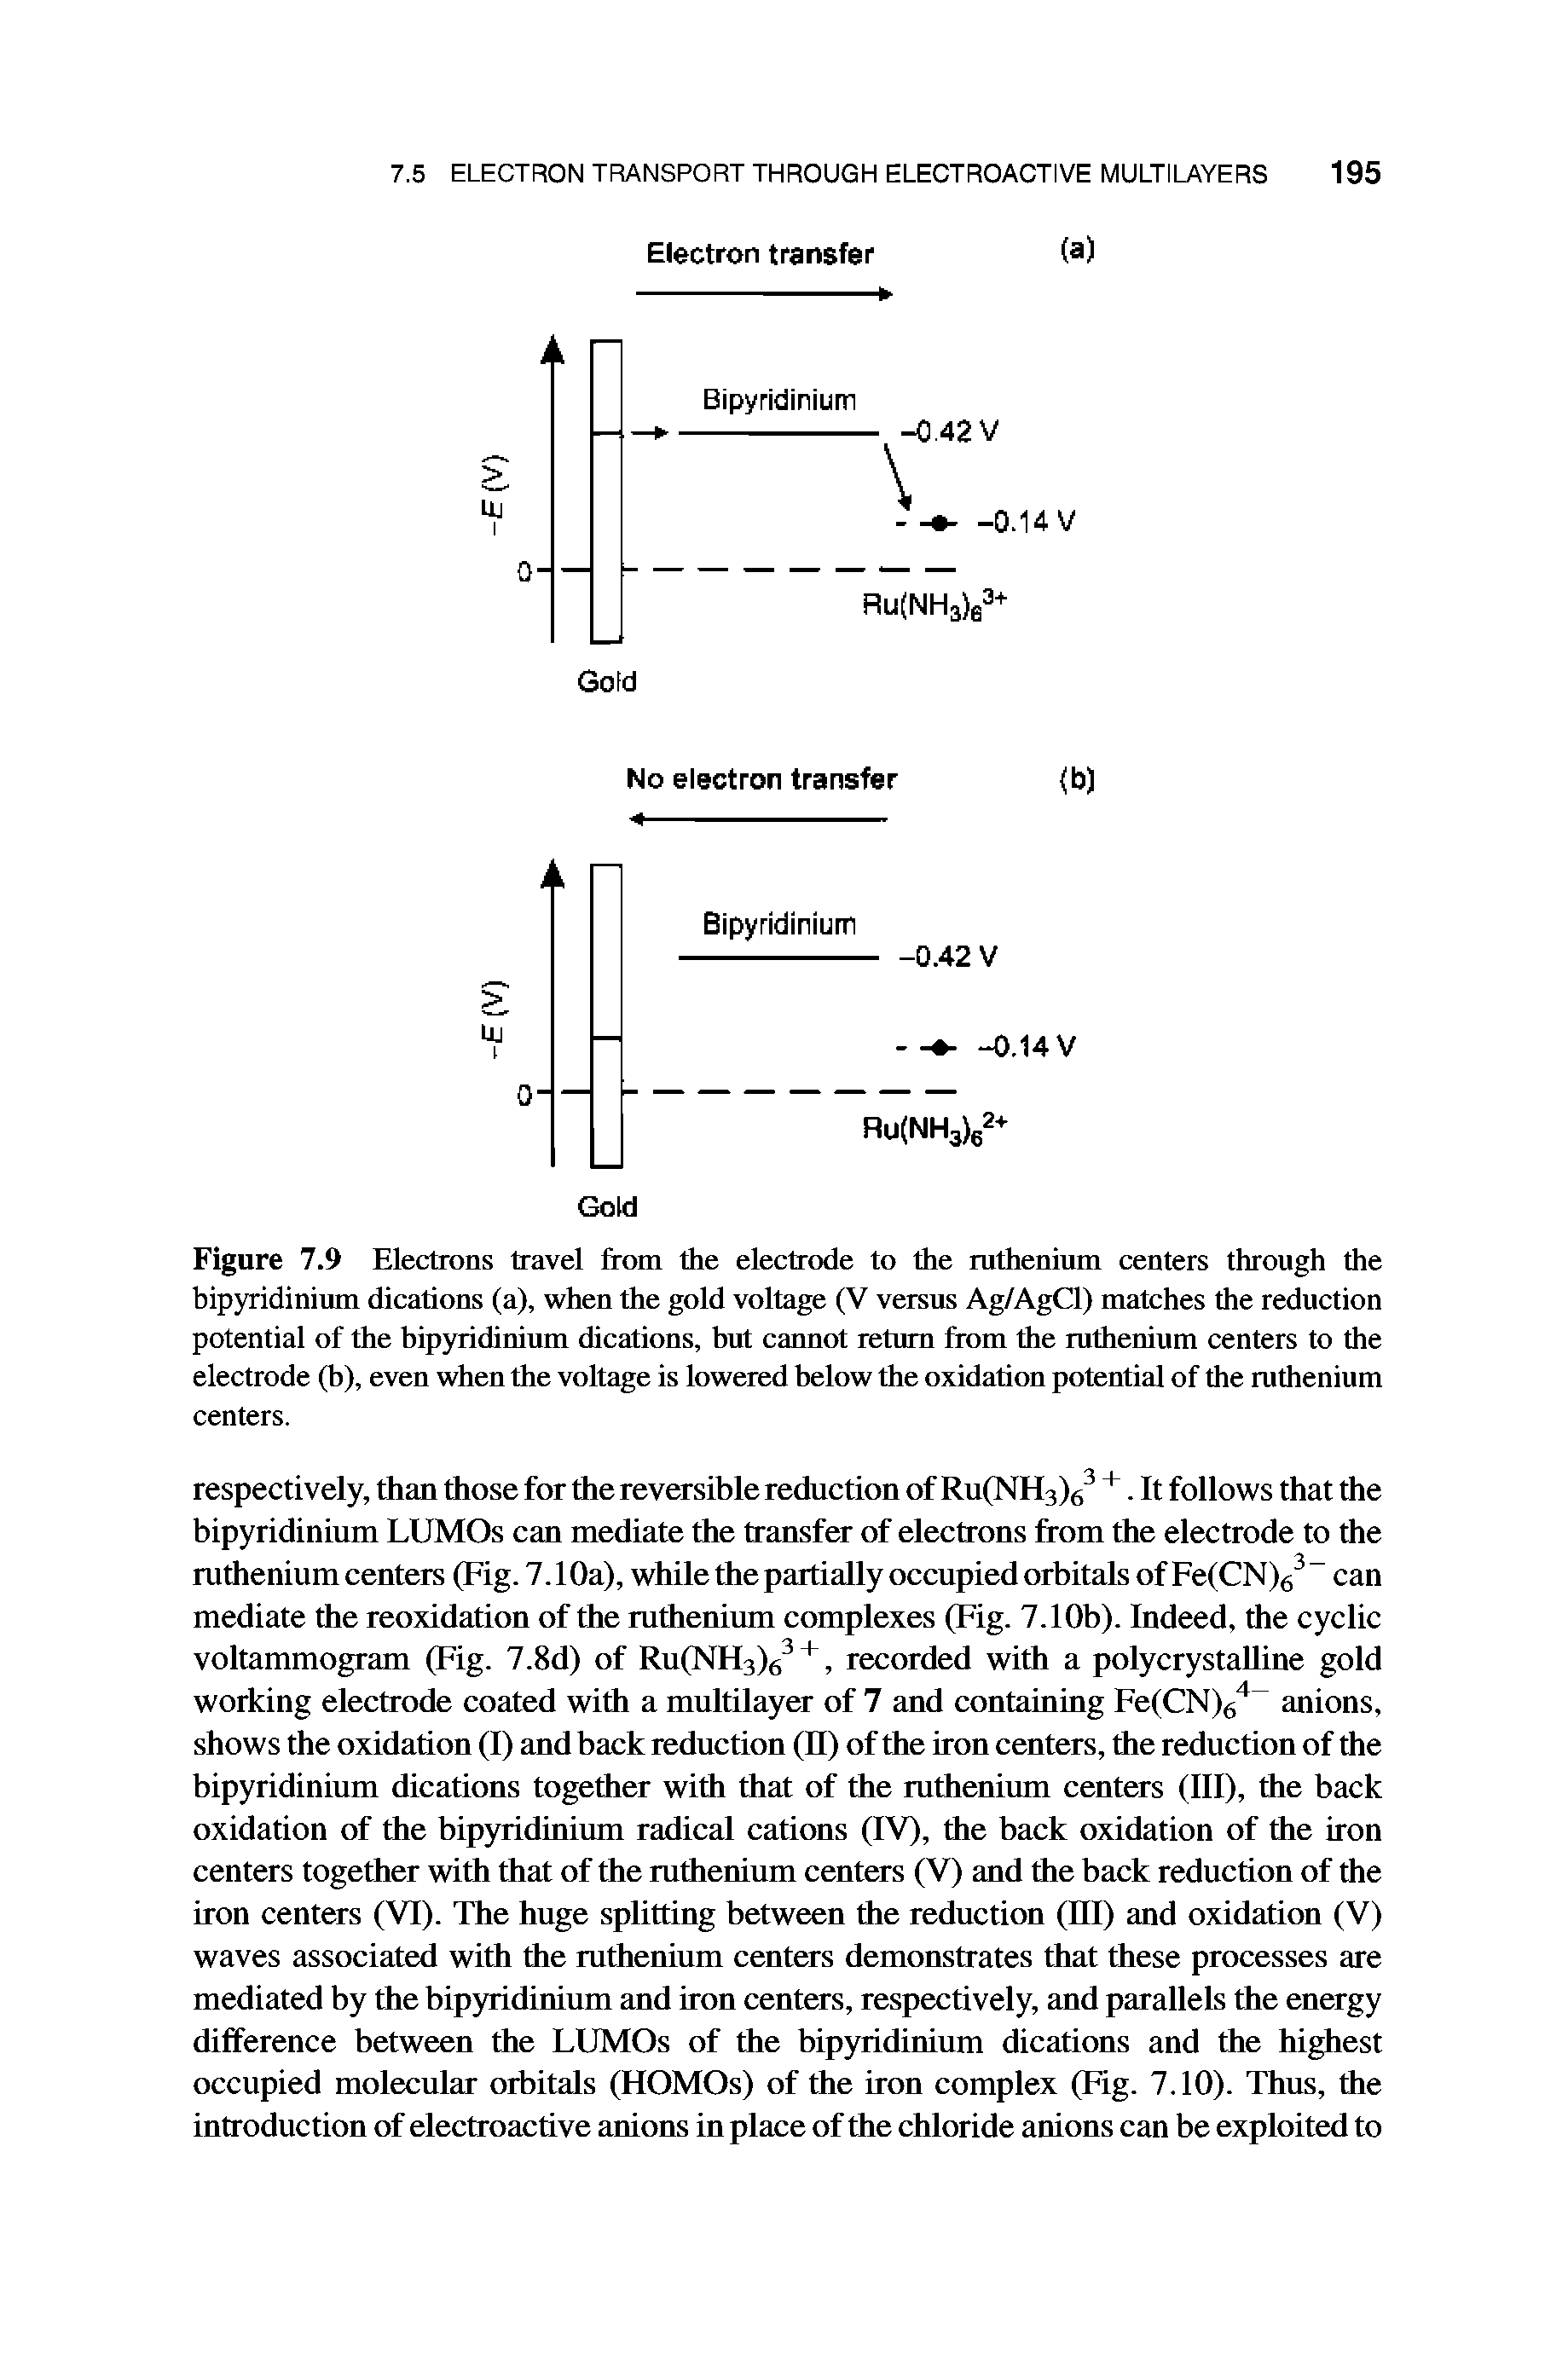 Figure 7.9 Electrons travel from the electrode to the ruthenium centers through the bipyridinium dications (a), when the gold voltage (V versus Ag/AgCl) matches the reduction potential of the bipyridinium dications, but cannot return from the ruthenium centers to the electrode (b), even when the voltage is lowered below the oxidation potential of the ruthenium centers.